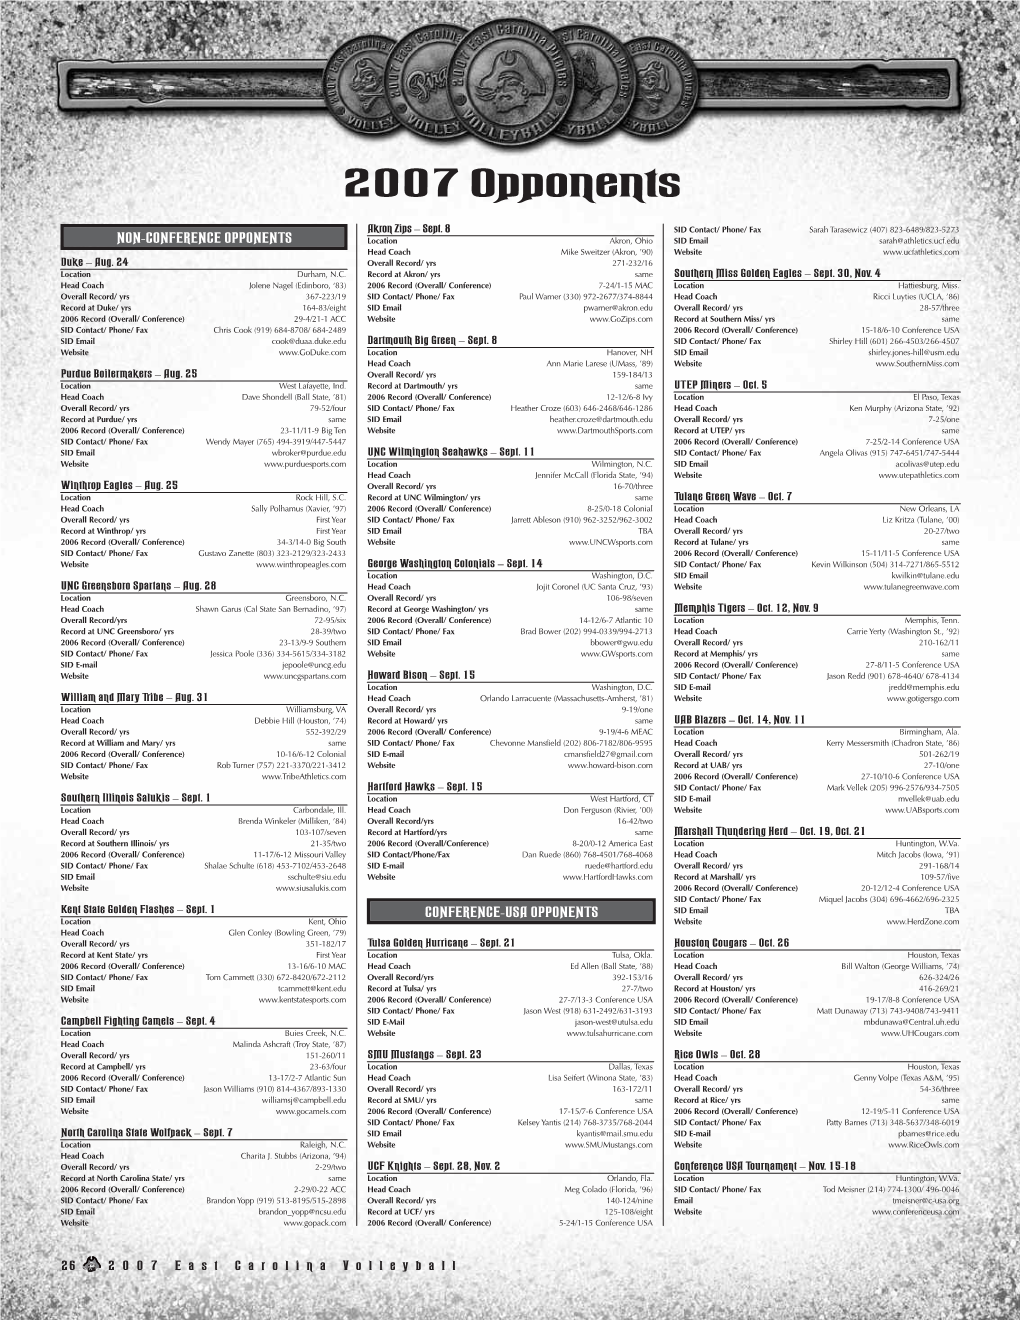 2007 Opponents